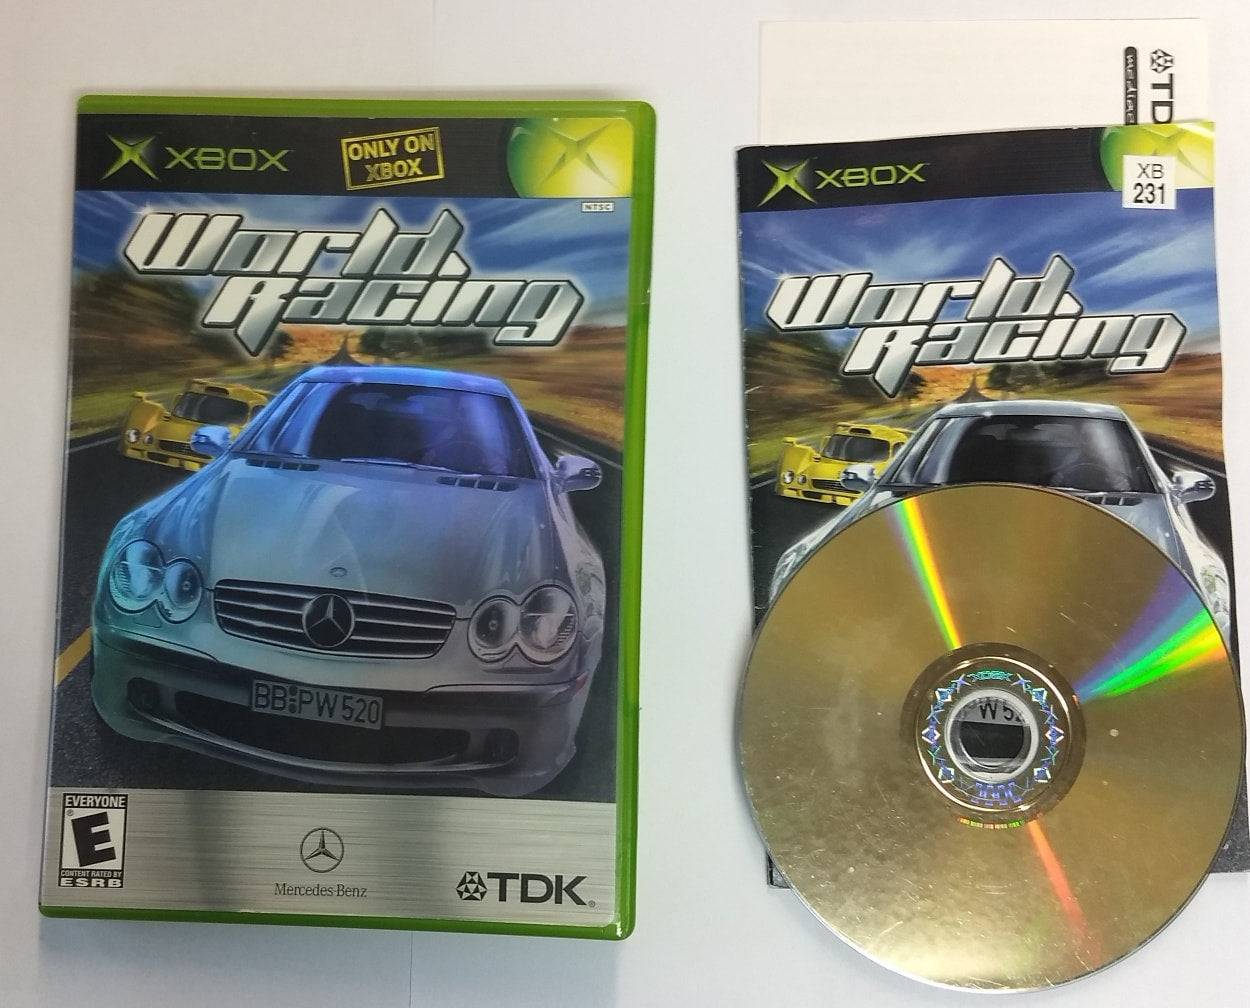 WORLD RACING (XBOX) - jeux video game-x